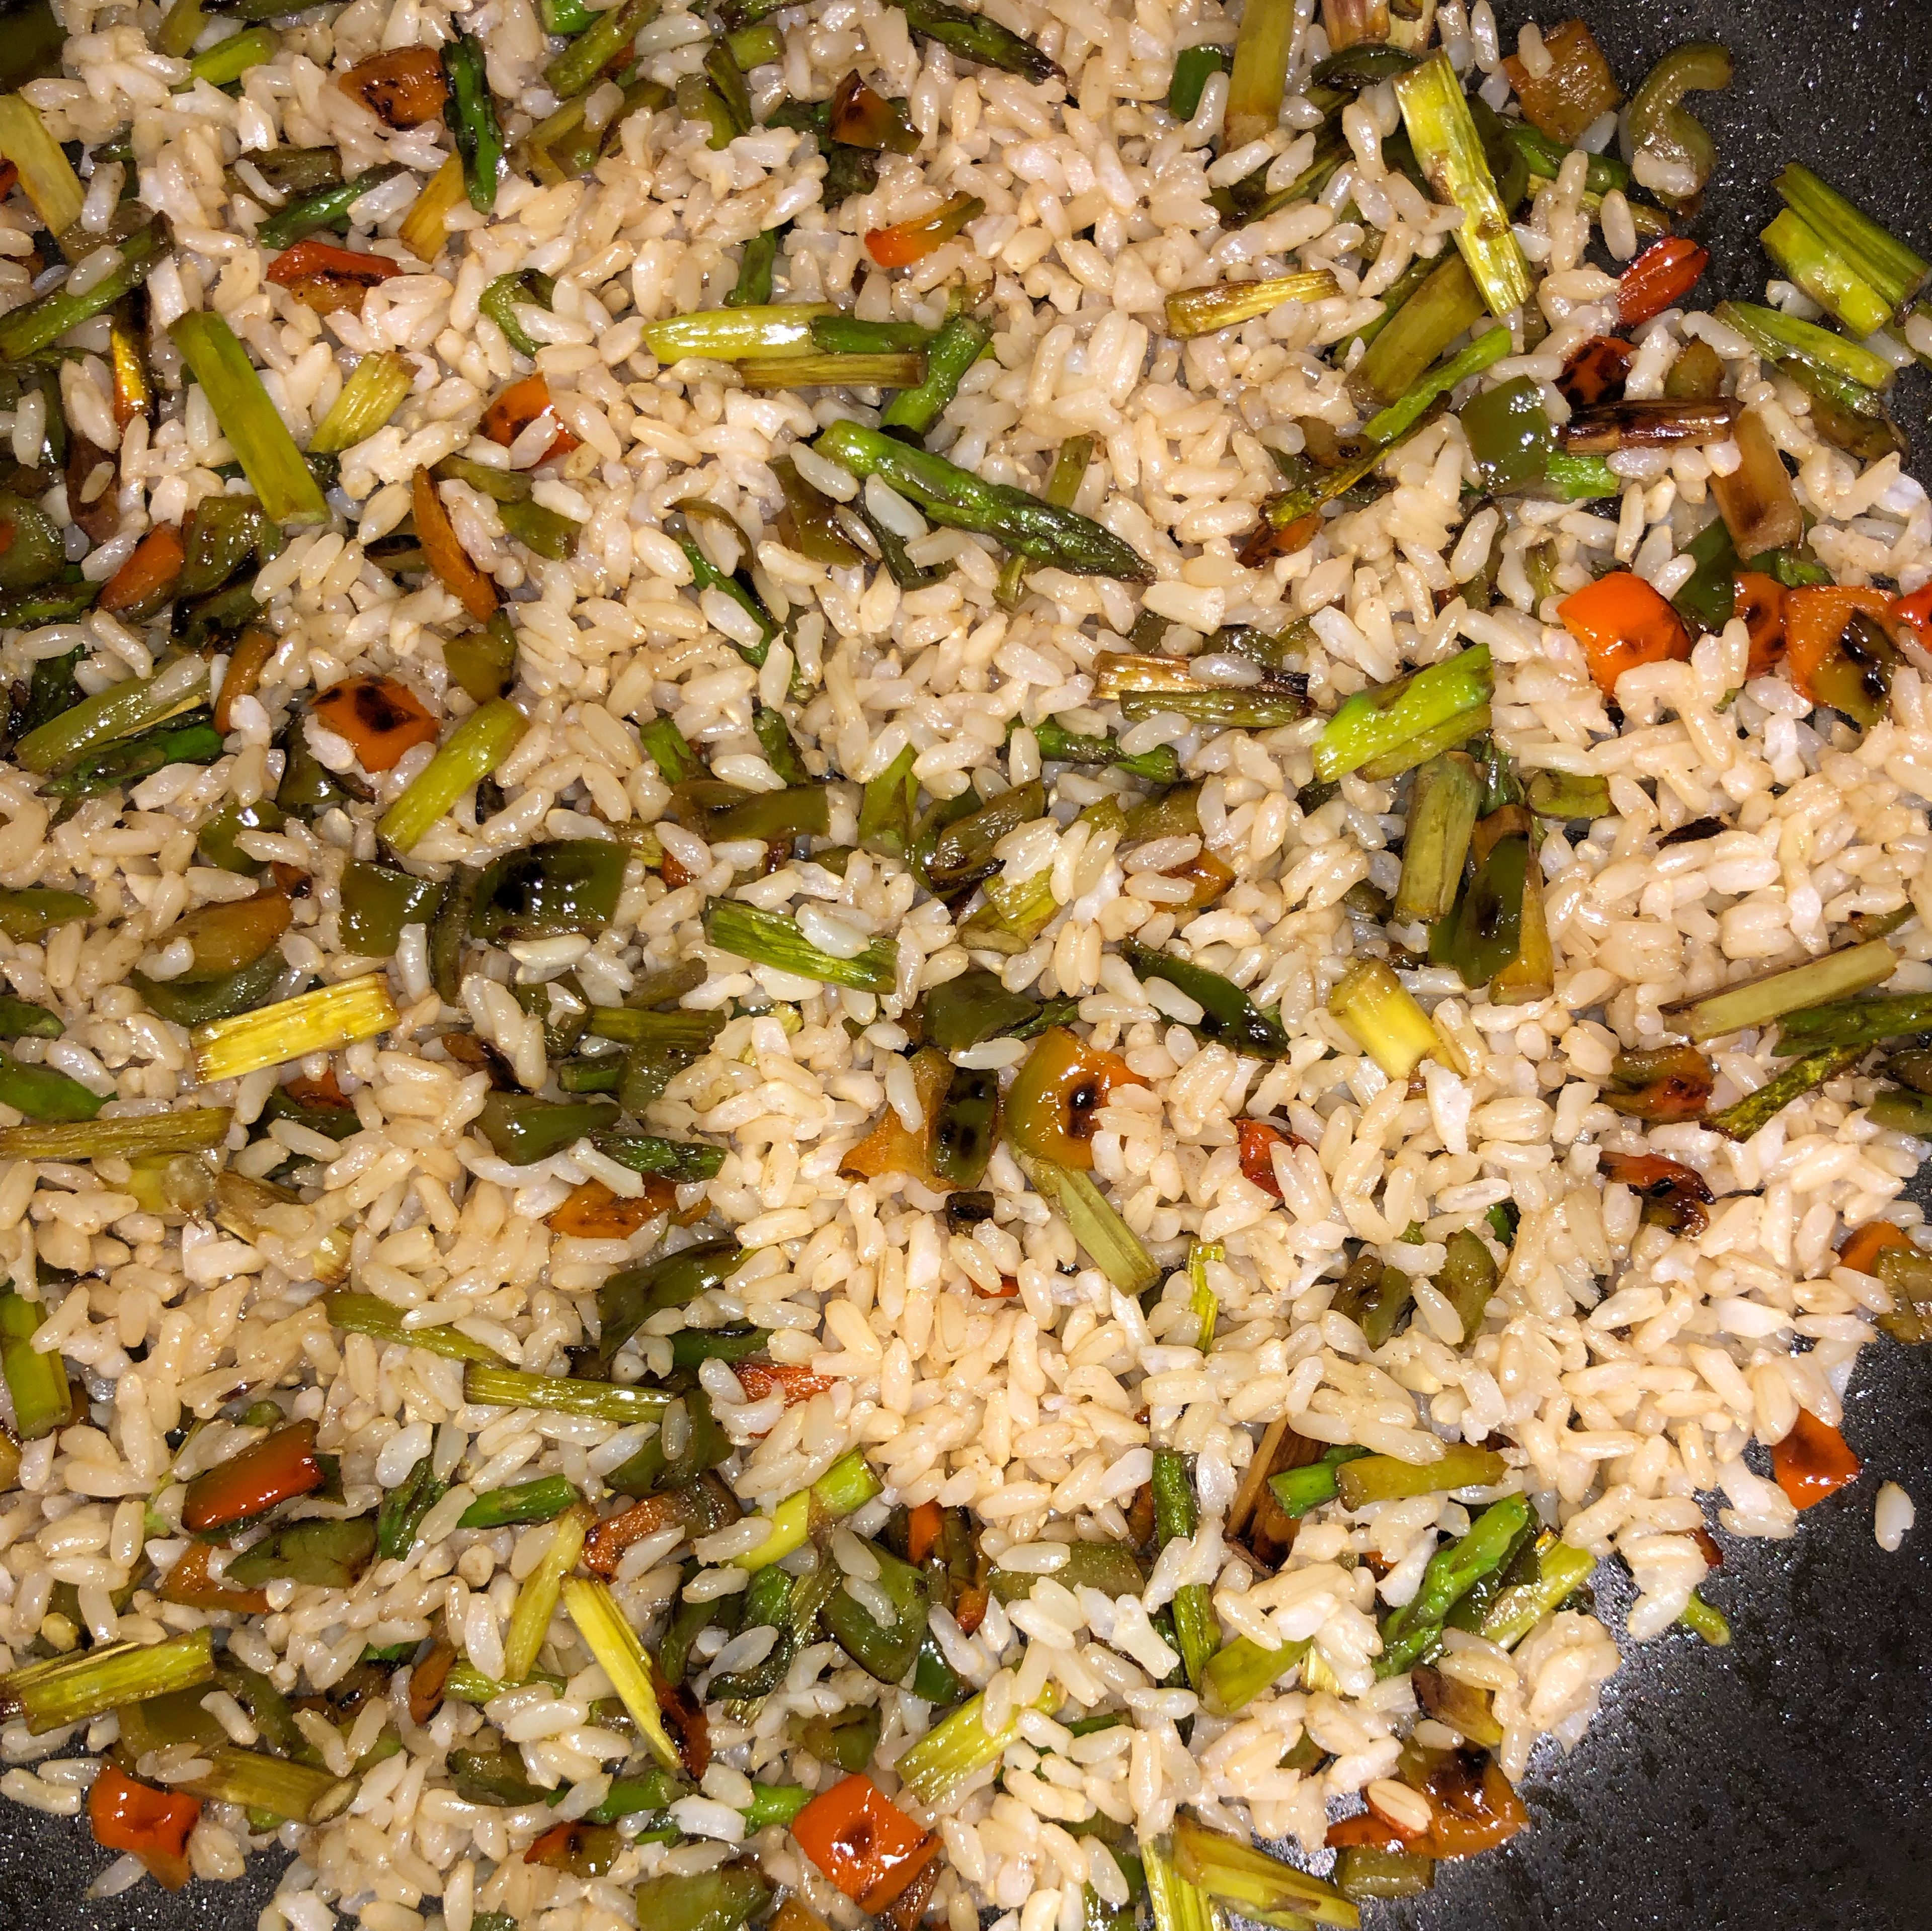 Add the preboiled brown rice to the pan with the vegetables.